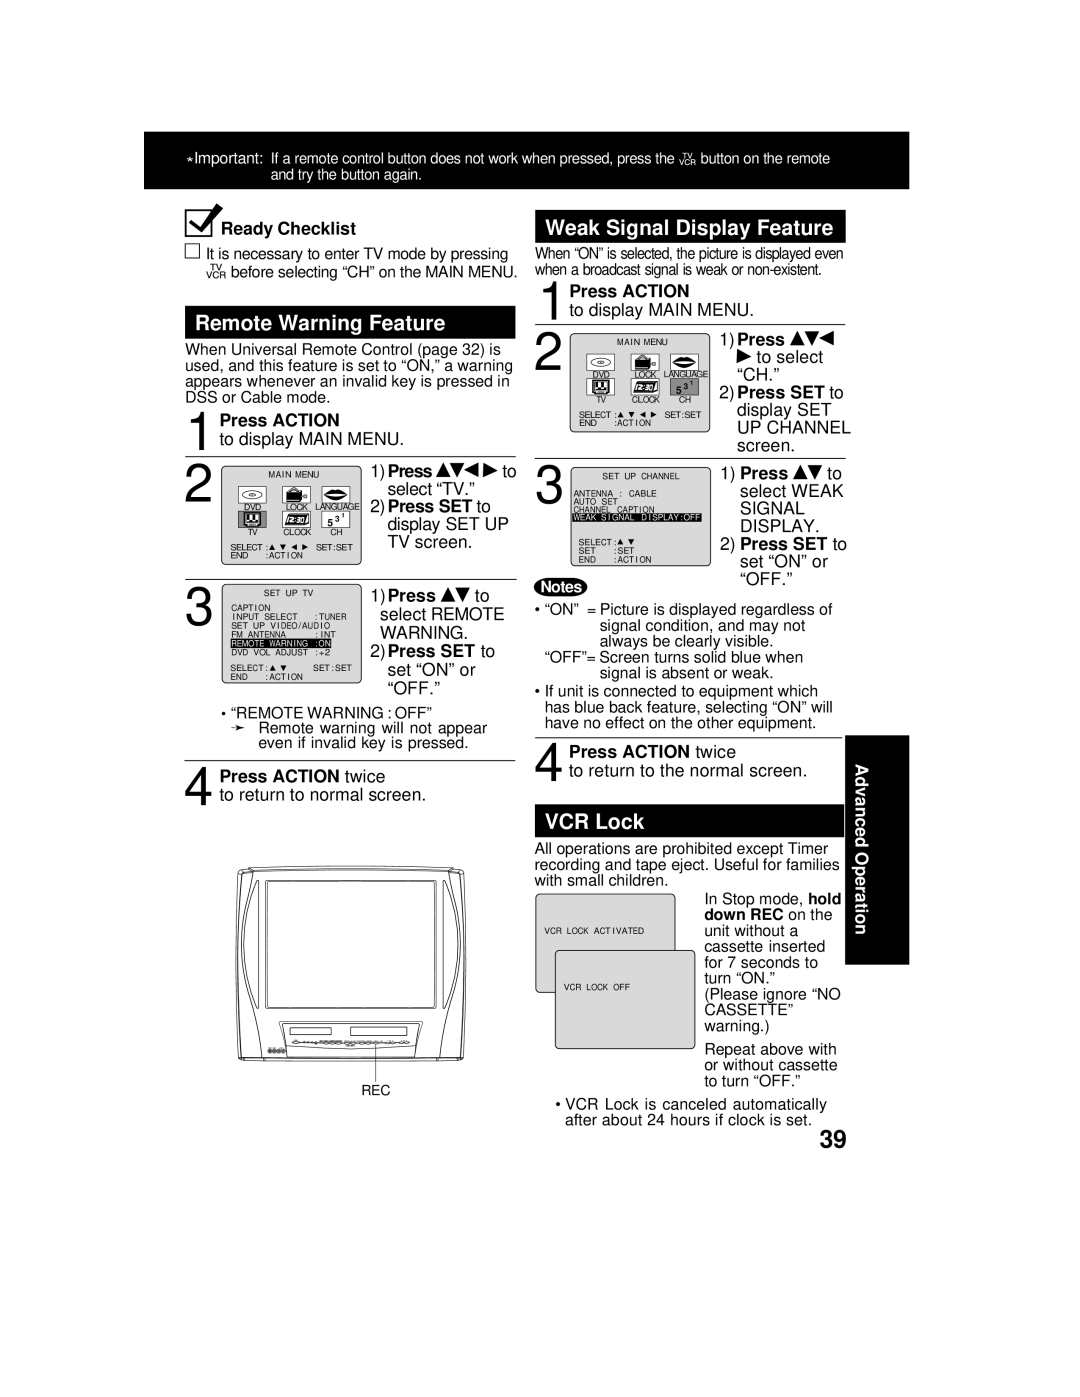 Panasonic AG 527DVDE manual Remote Warning Feature, Weak Signal Display Feature, VCR Lock, 1Press ACTION, 2Press SET to 